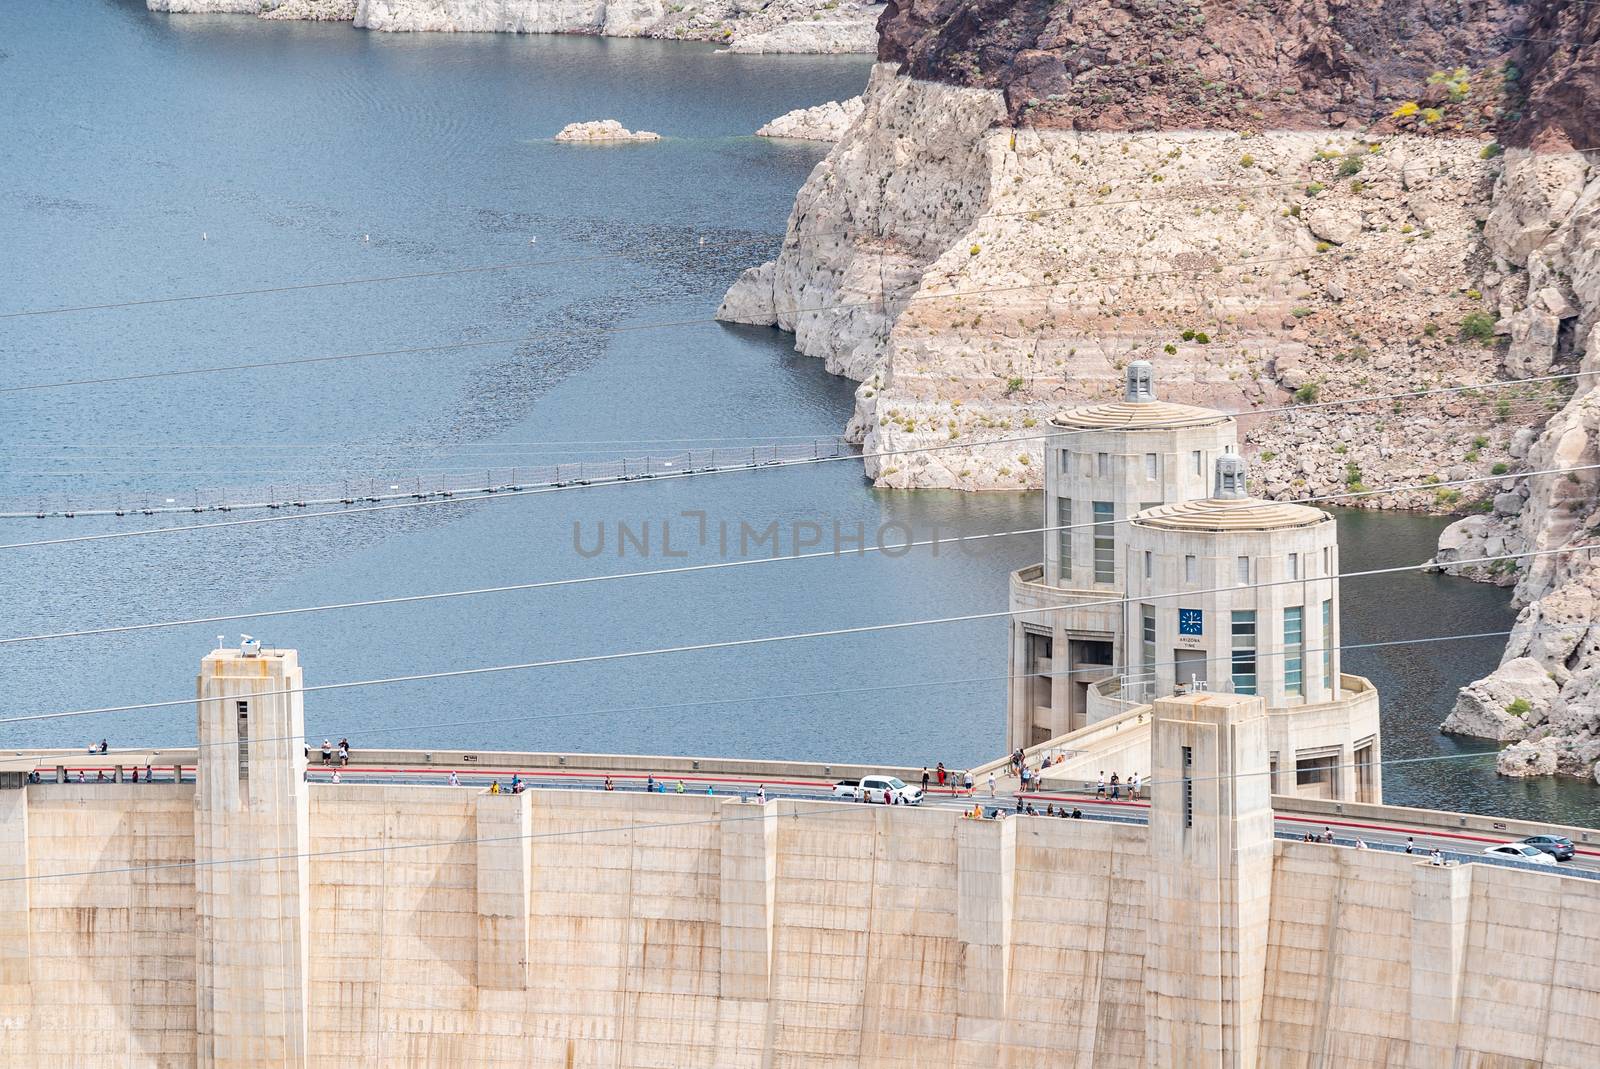 Hoover dam USA by vichie81